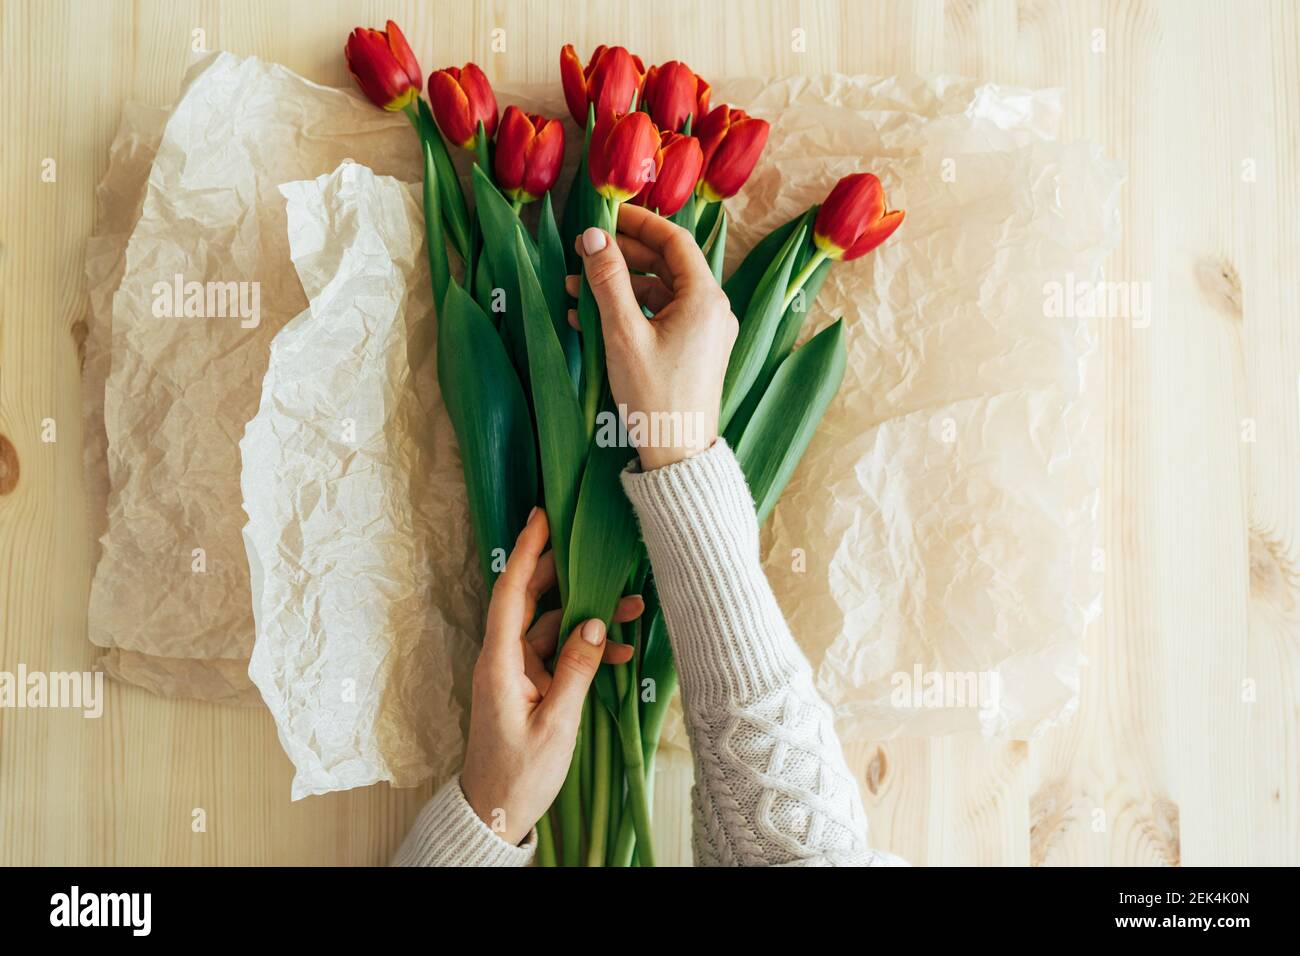 Top view of hands wrapping red tulips in craft paper. Stock Photo